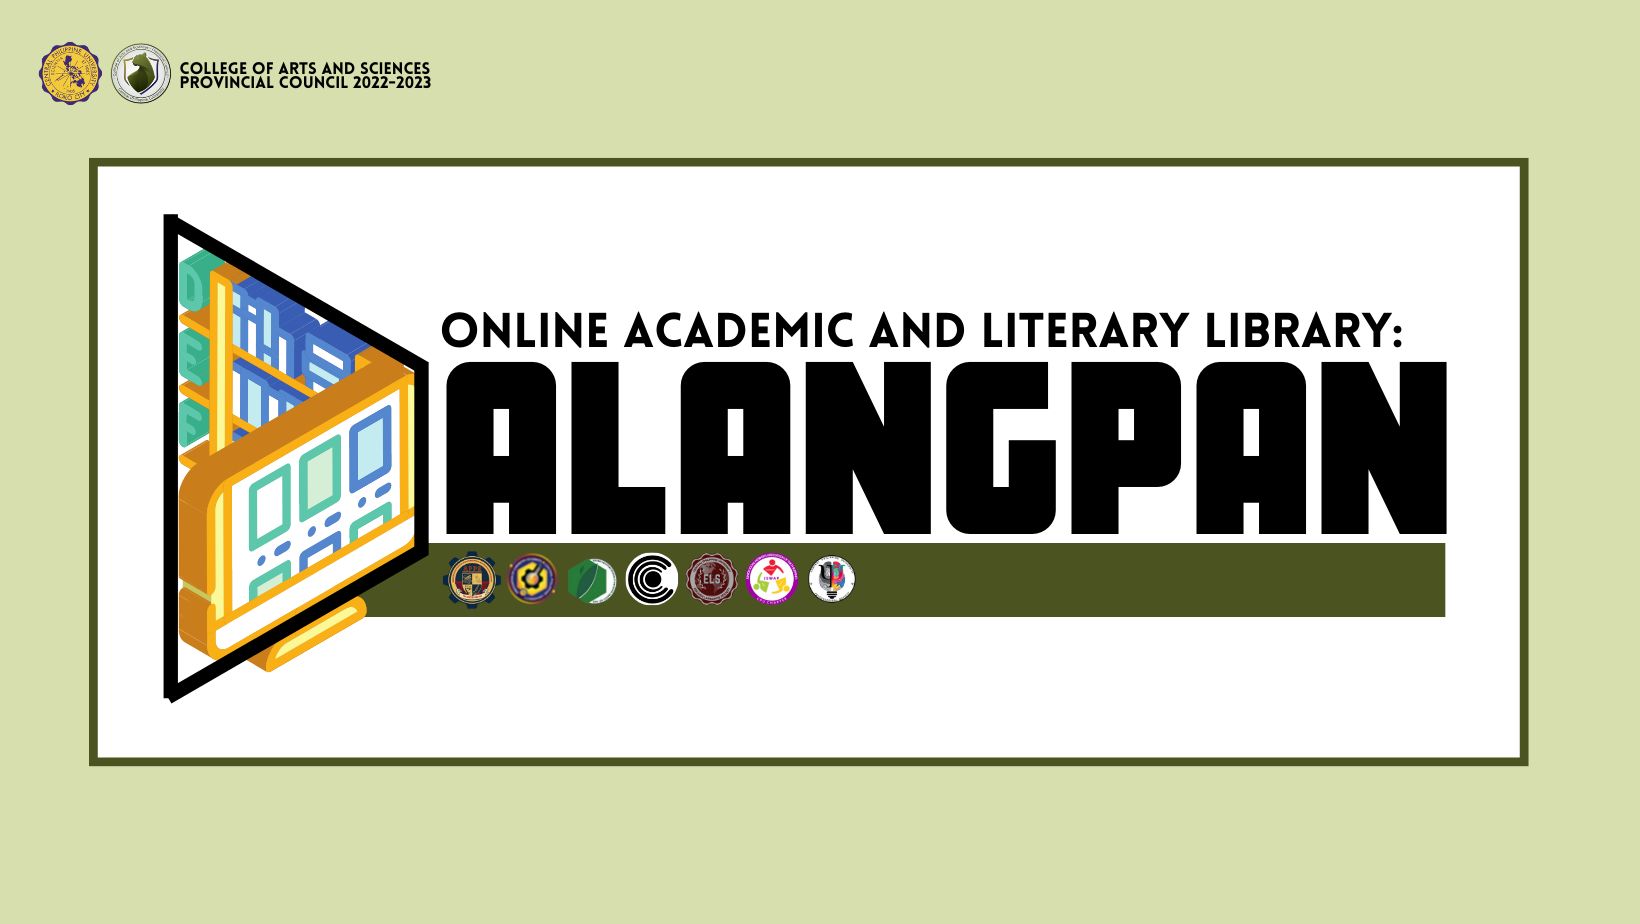 DALANGPAN was created in 2020 by College of Arts and Sciences Provincial Council (CASPC) and Arts and Sciences Voice Prints (ASVP) 